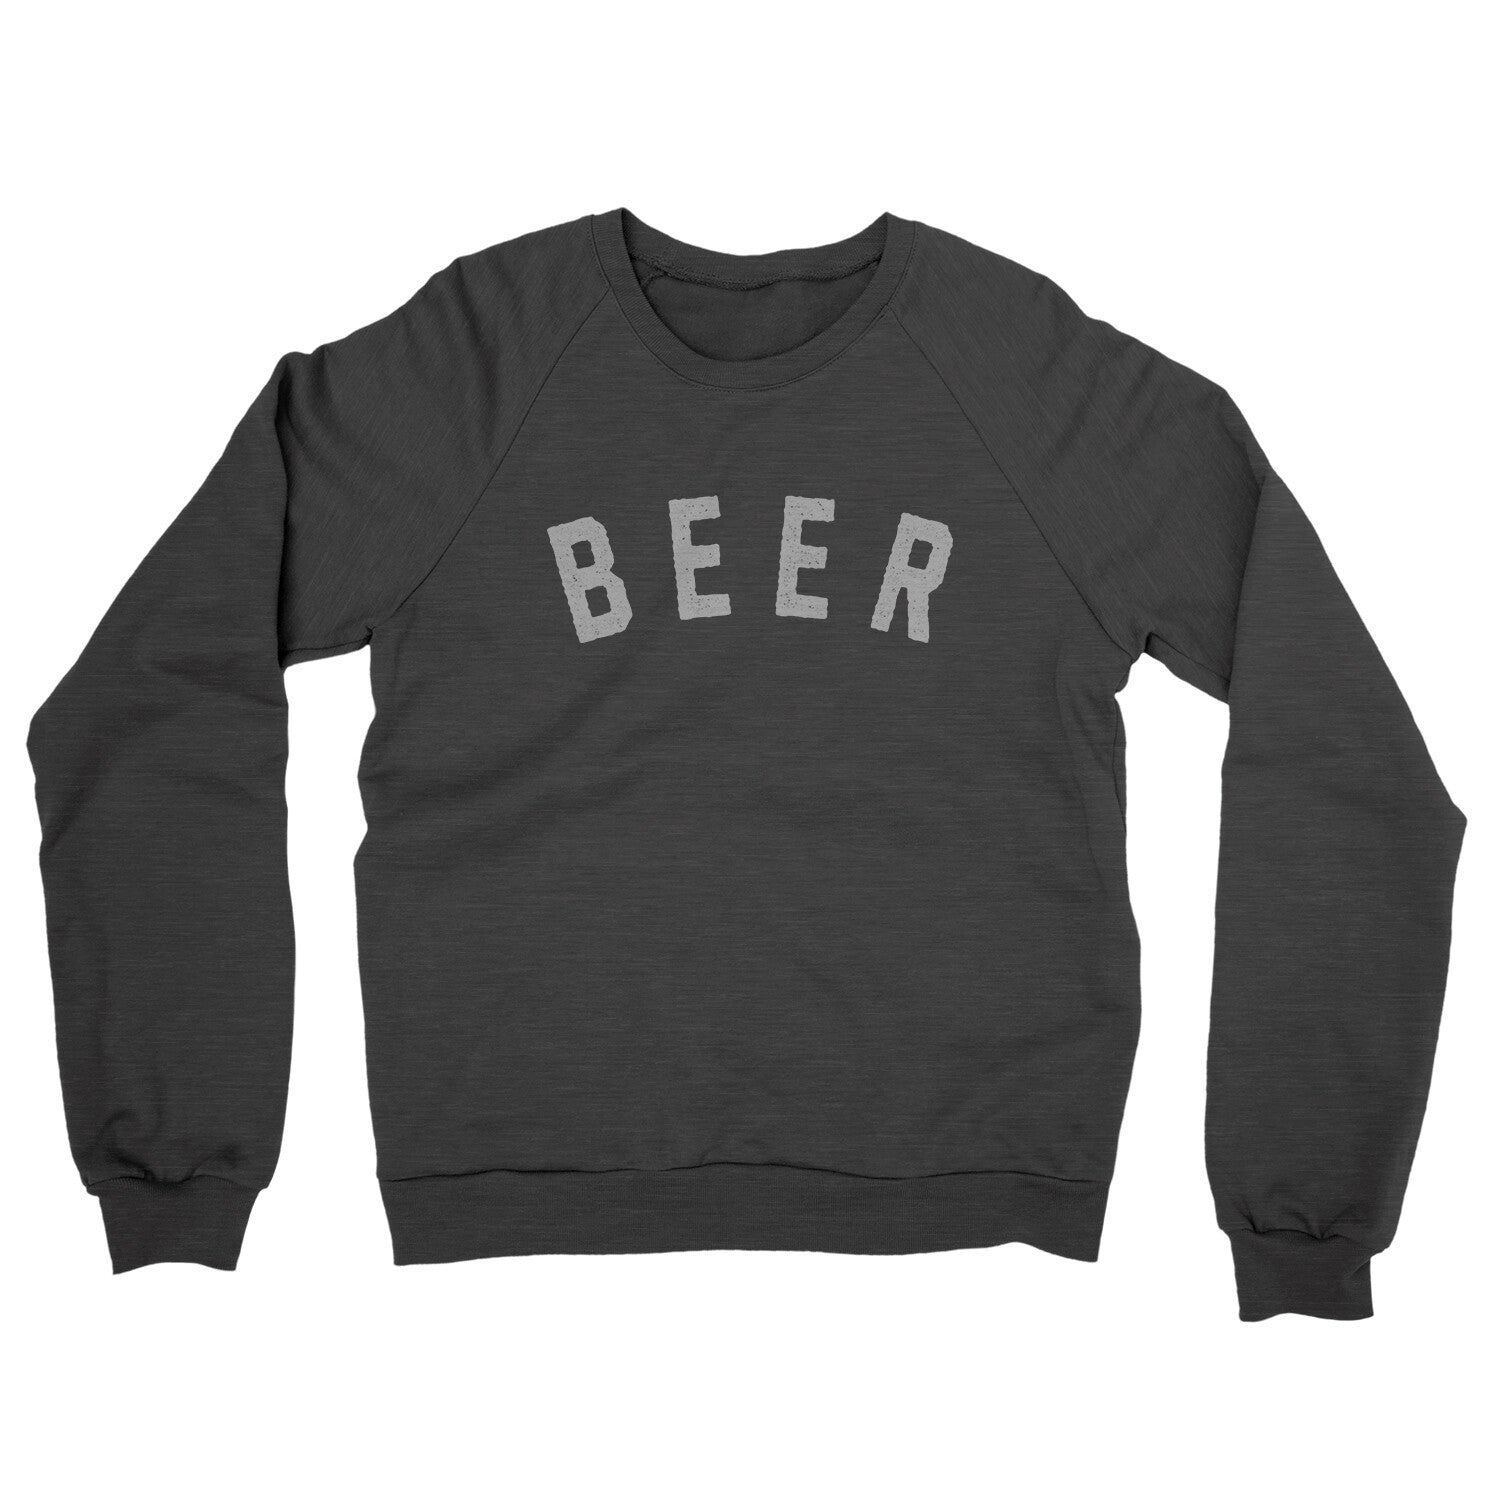 Beer in Charcoal Heather Color